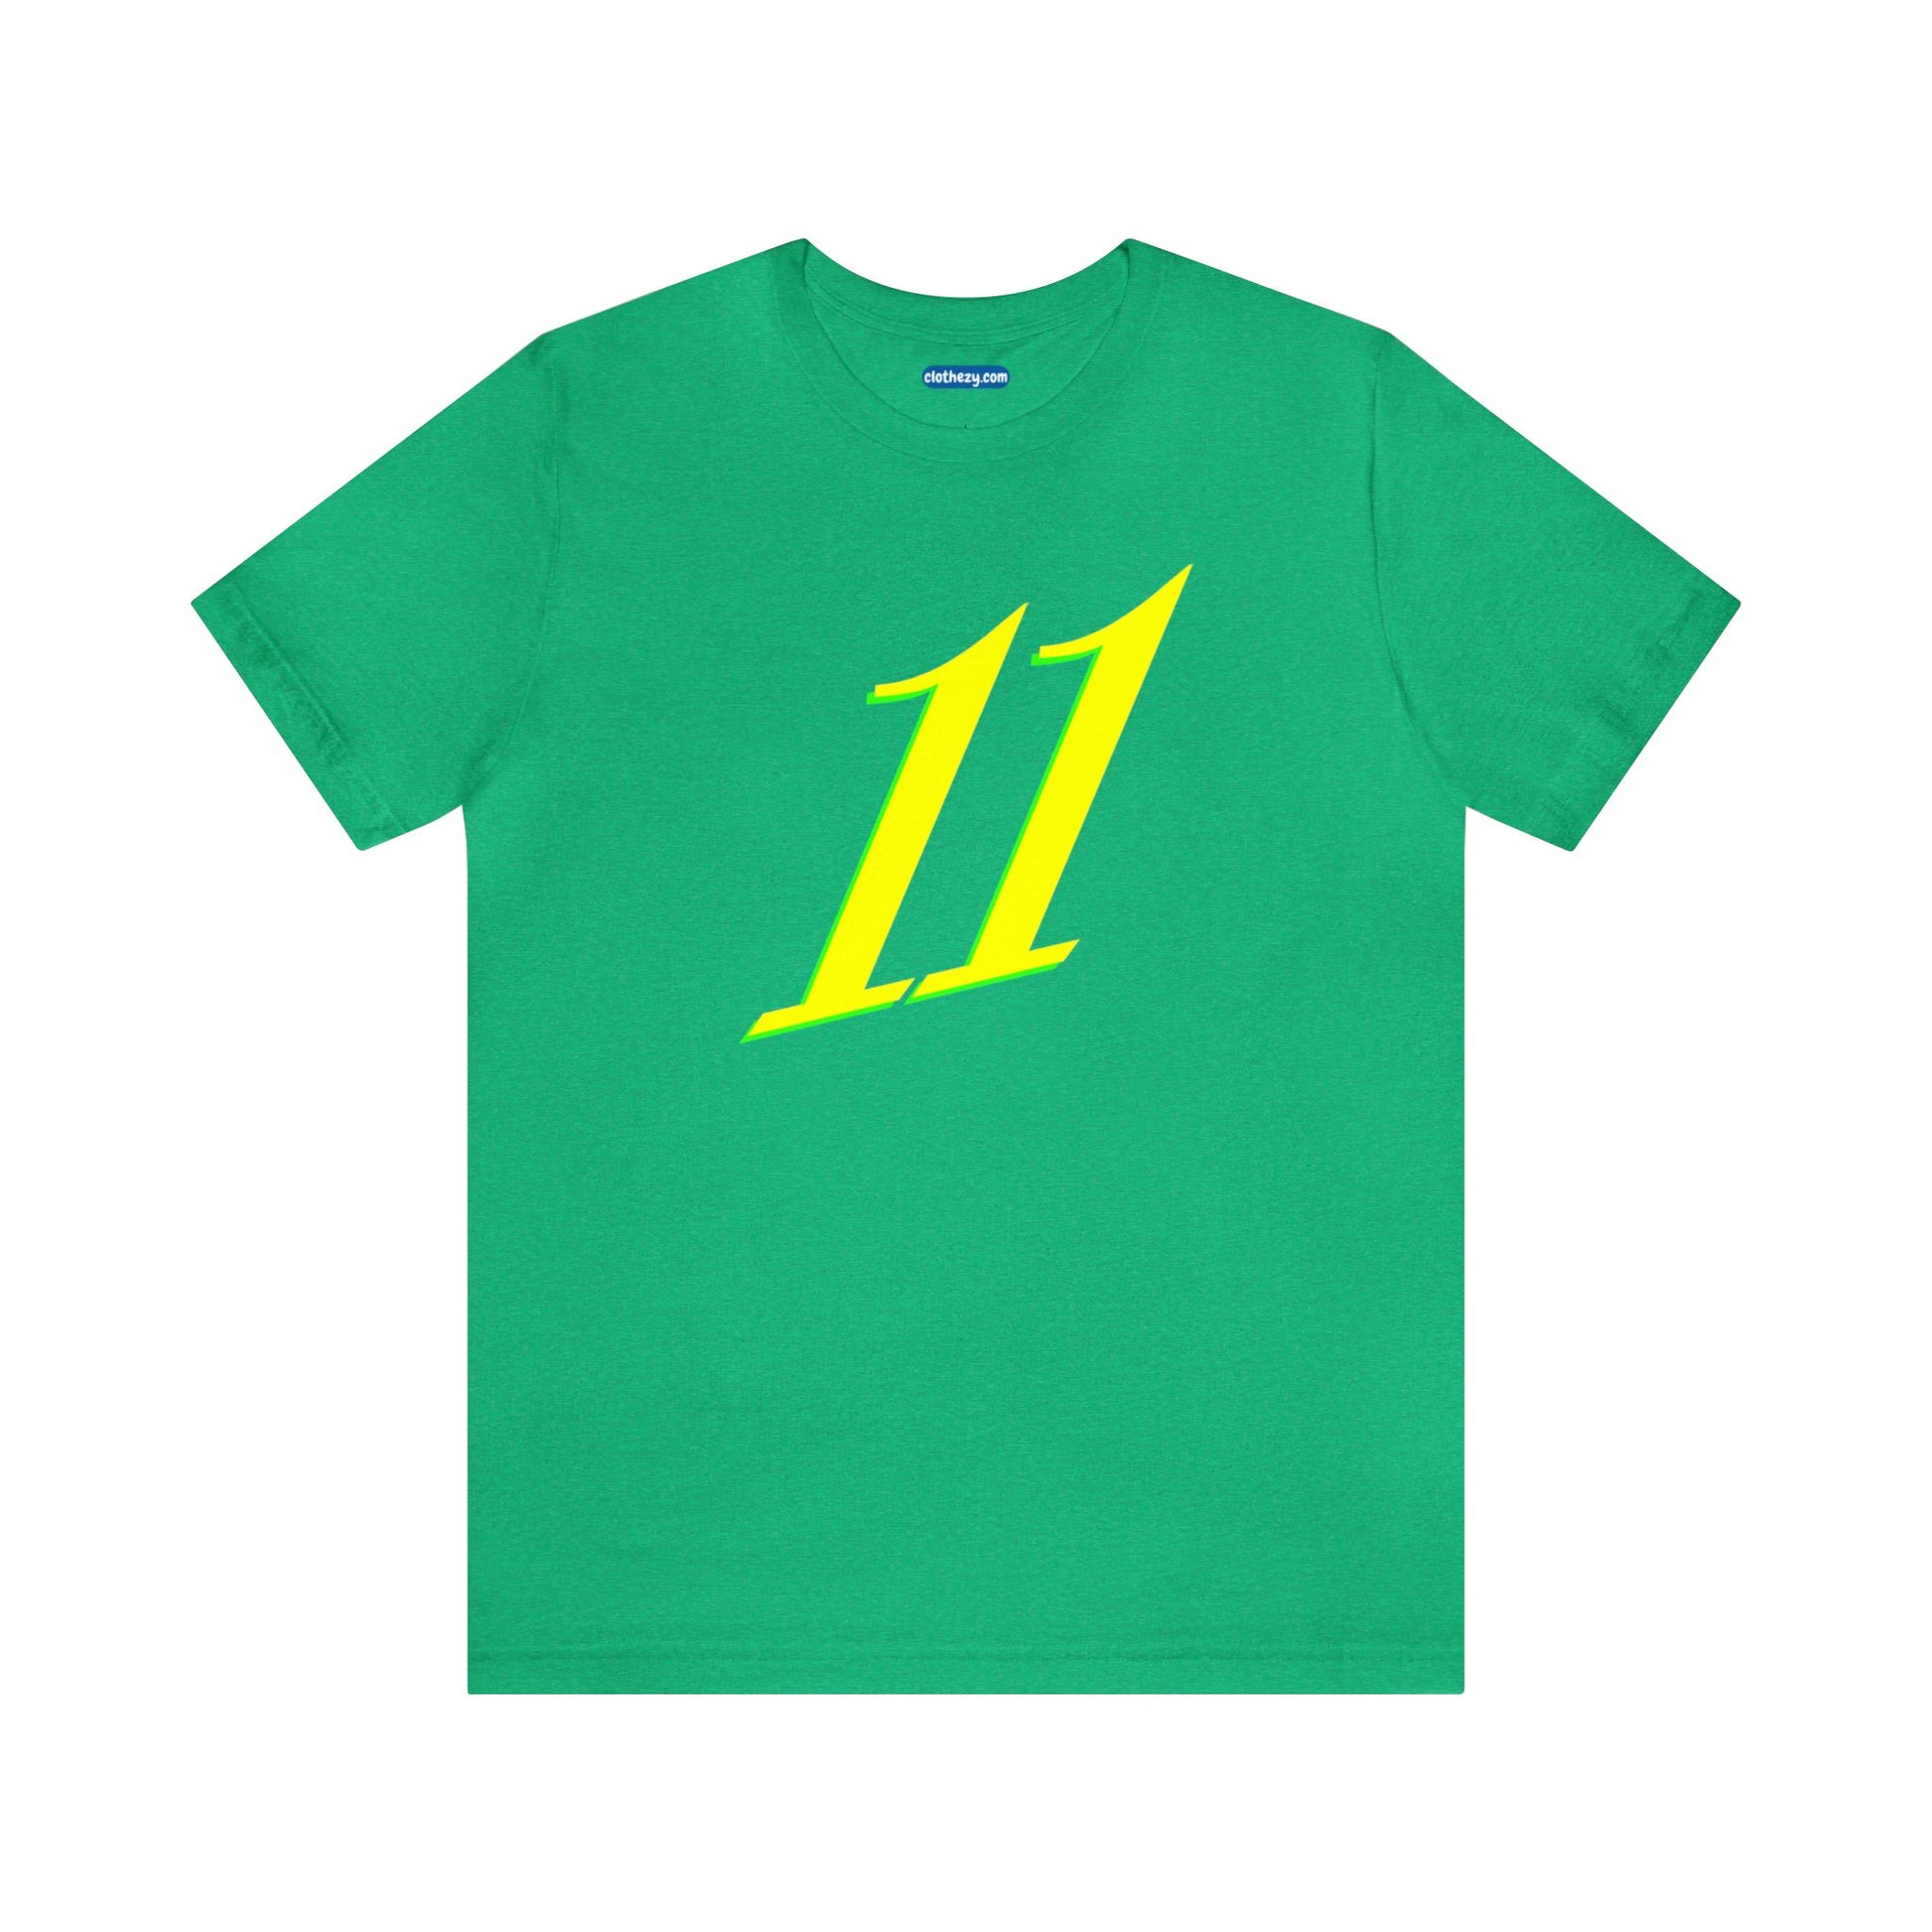 Number 11 Design - Soft Cotton Tee for birthdays and celebrations, Gift for friends and family, Multiple Options by clothezy.com in Green Heather Size Small - Buy Now